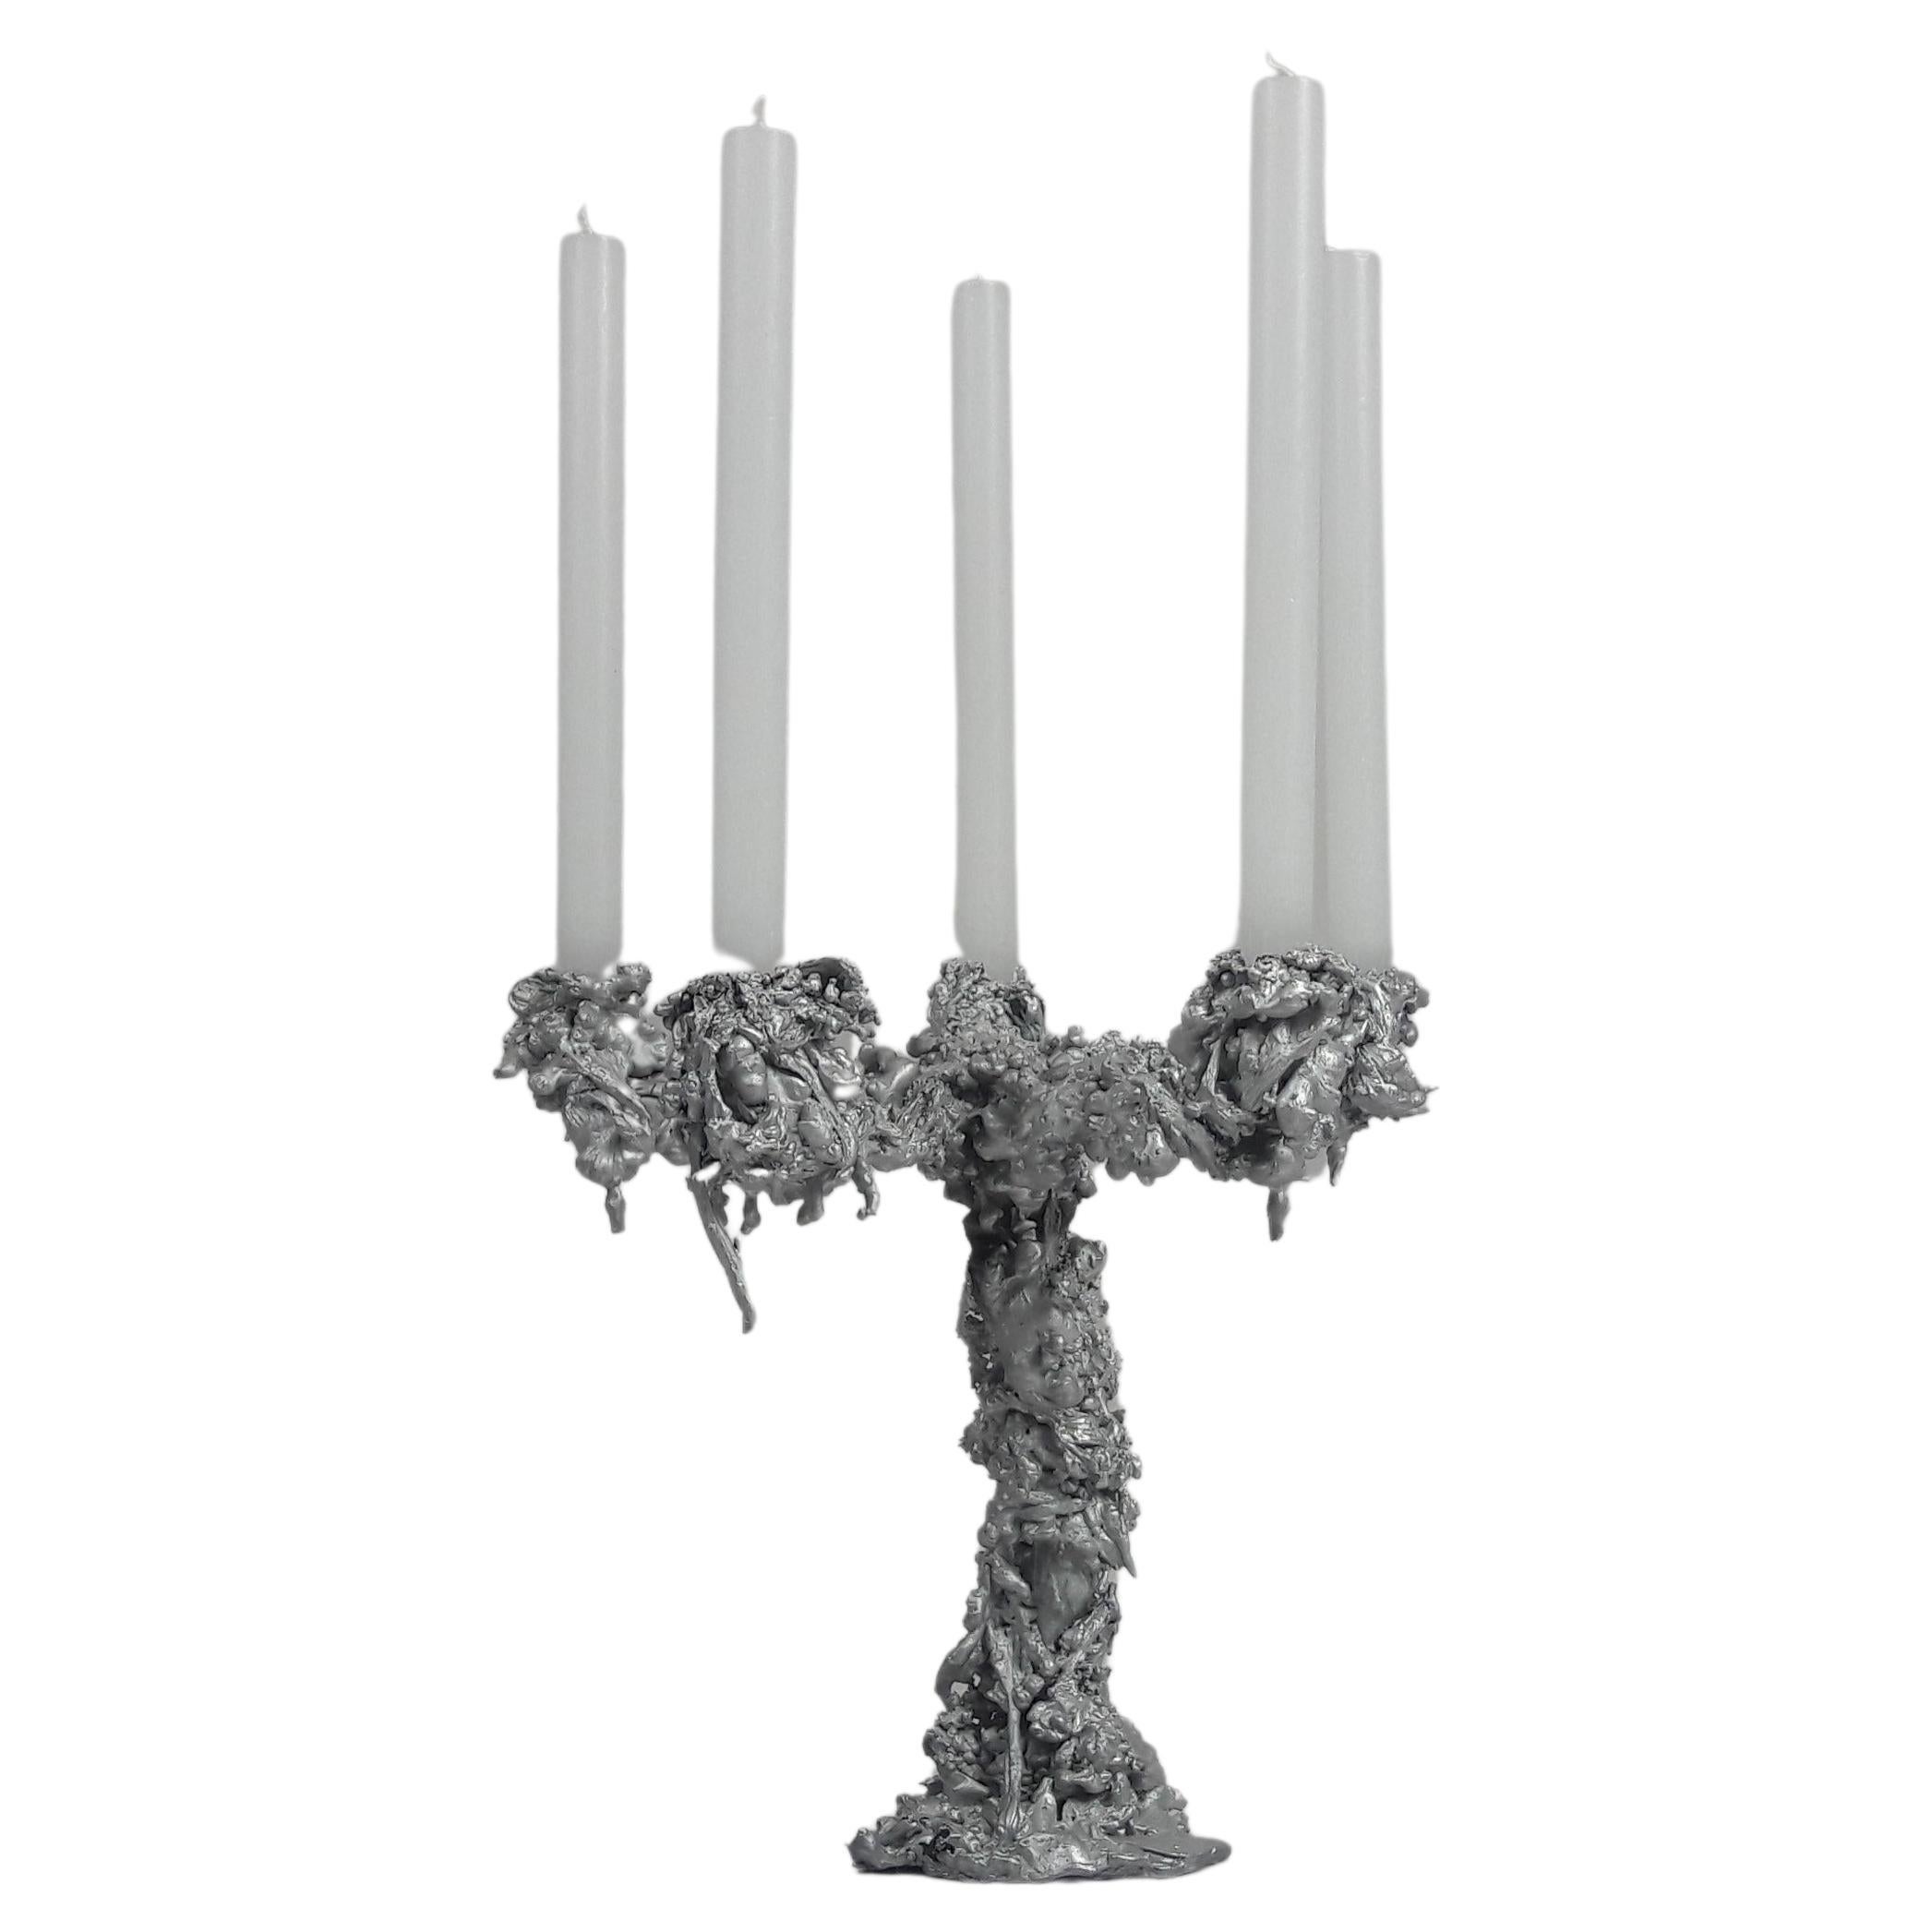 The upsidedown 5 armed aluminum candelabra is made in an edition of 10. This 'collectible design' objects contains a self-developed production method of hot wax solidifying in cold water, which makes every piece in this serie unique. The candelabra